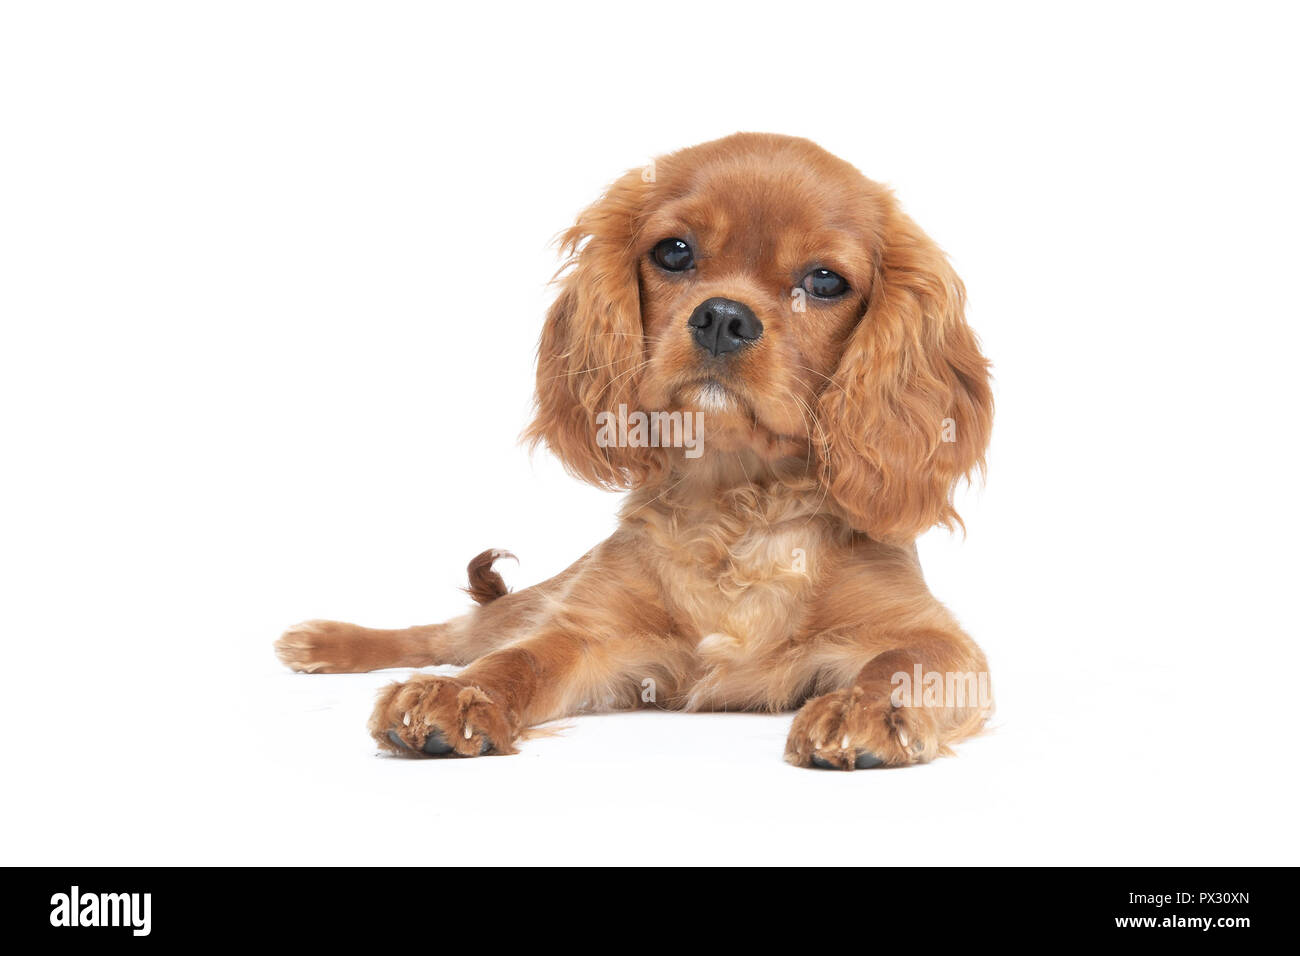 Cute dog, cavalier spaniel puppy, isolated on white background Stock Photo